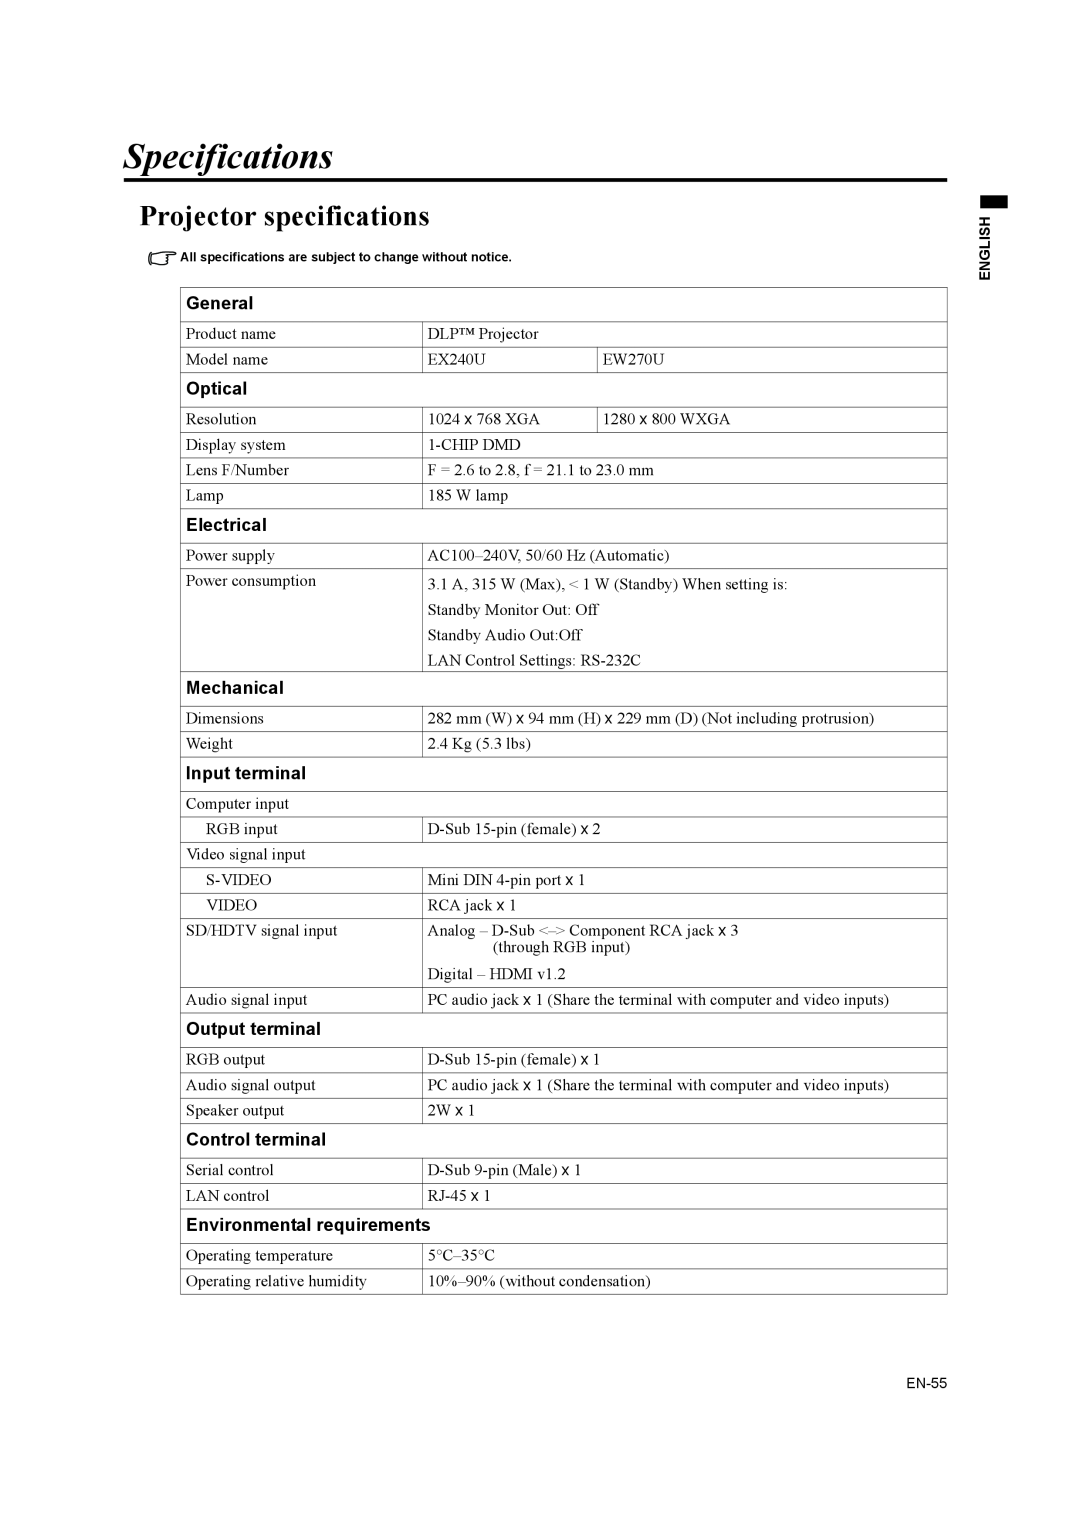 Mitsubishi Electronics EW270U user manual Specifications, Projector specifications 